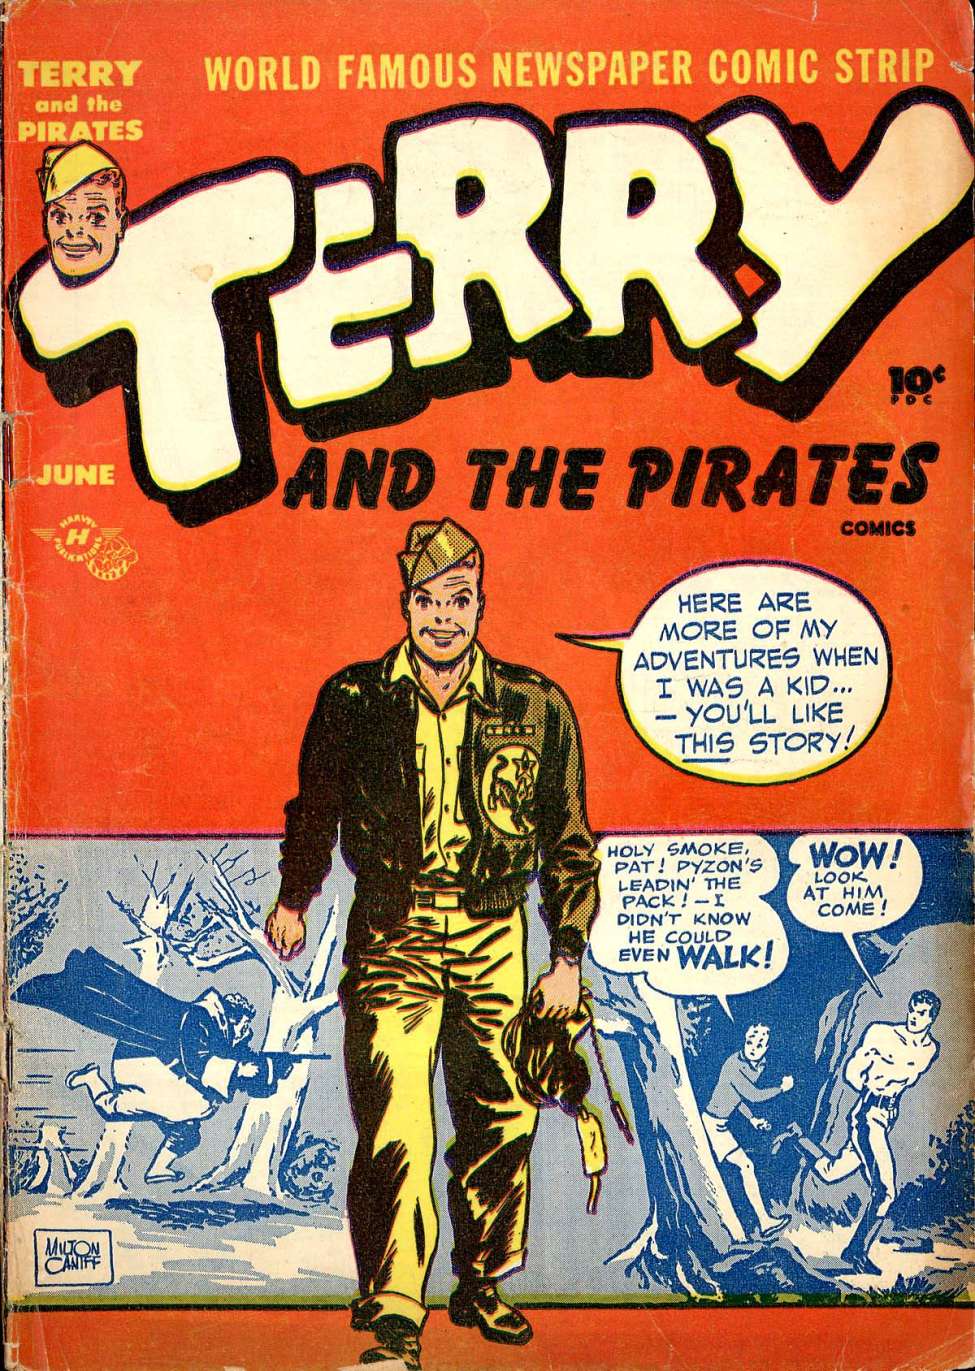 Book Cover For Terry and the Pirates 4